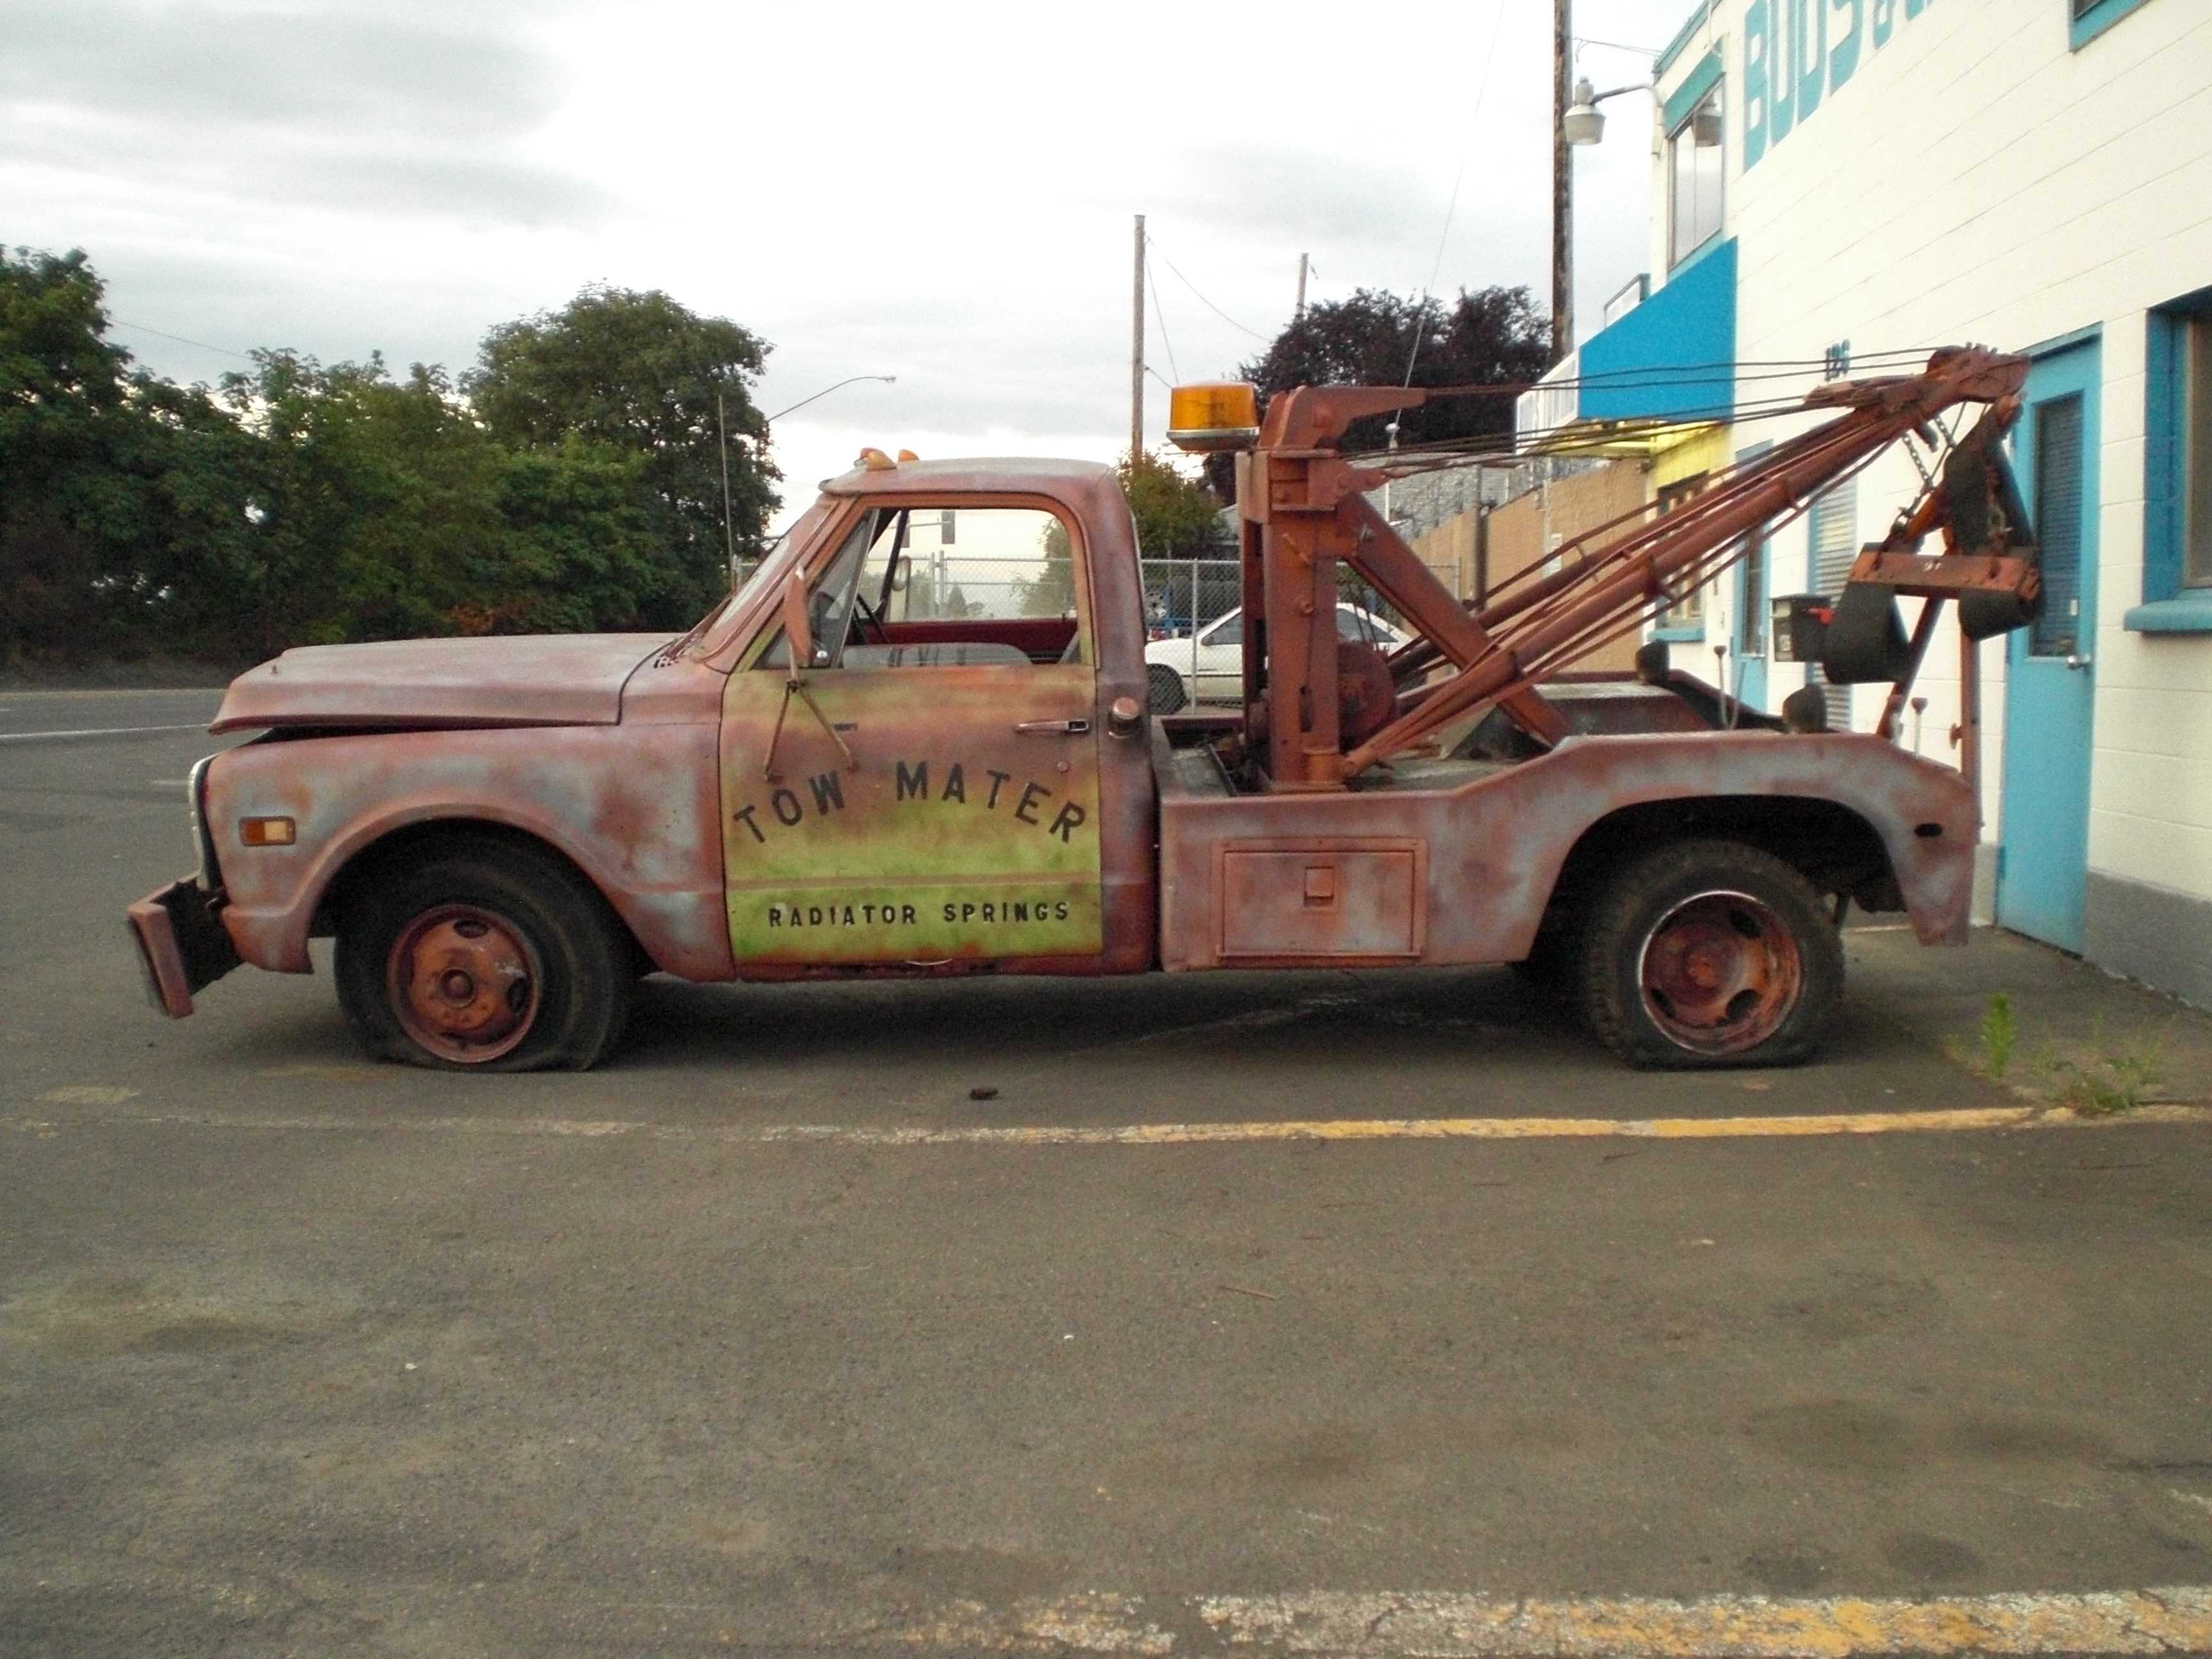 Tow Mater Image Thecelebritypix